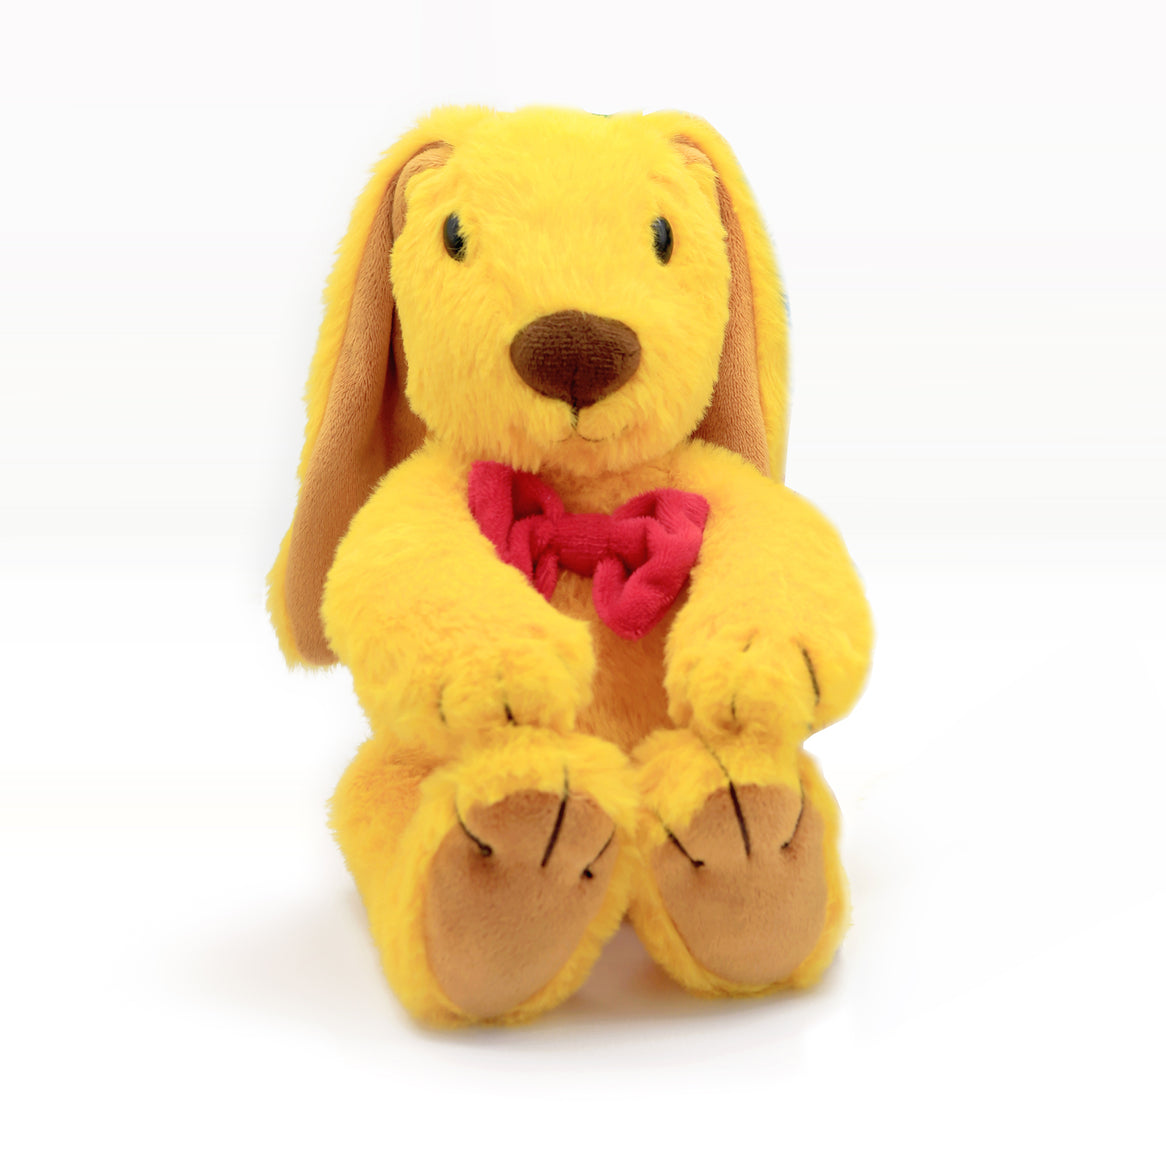 Zeke's Bunny Abacus: The Yellow Stuffed Plush will be there for your little one to hug tight as they work on their potty-training confidence